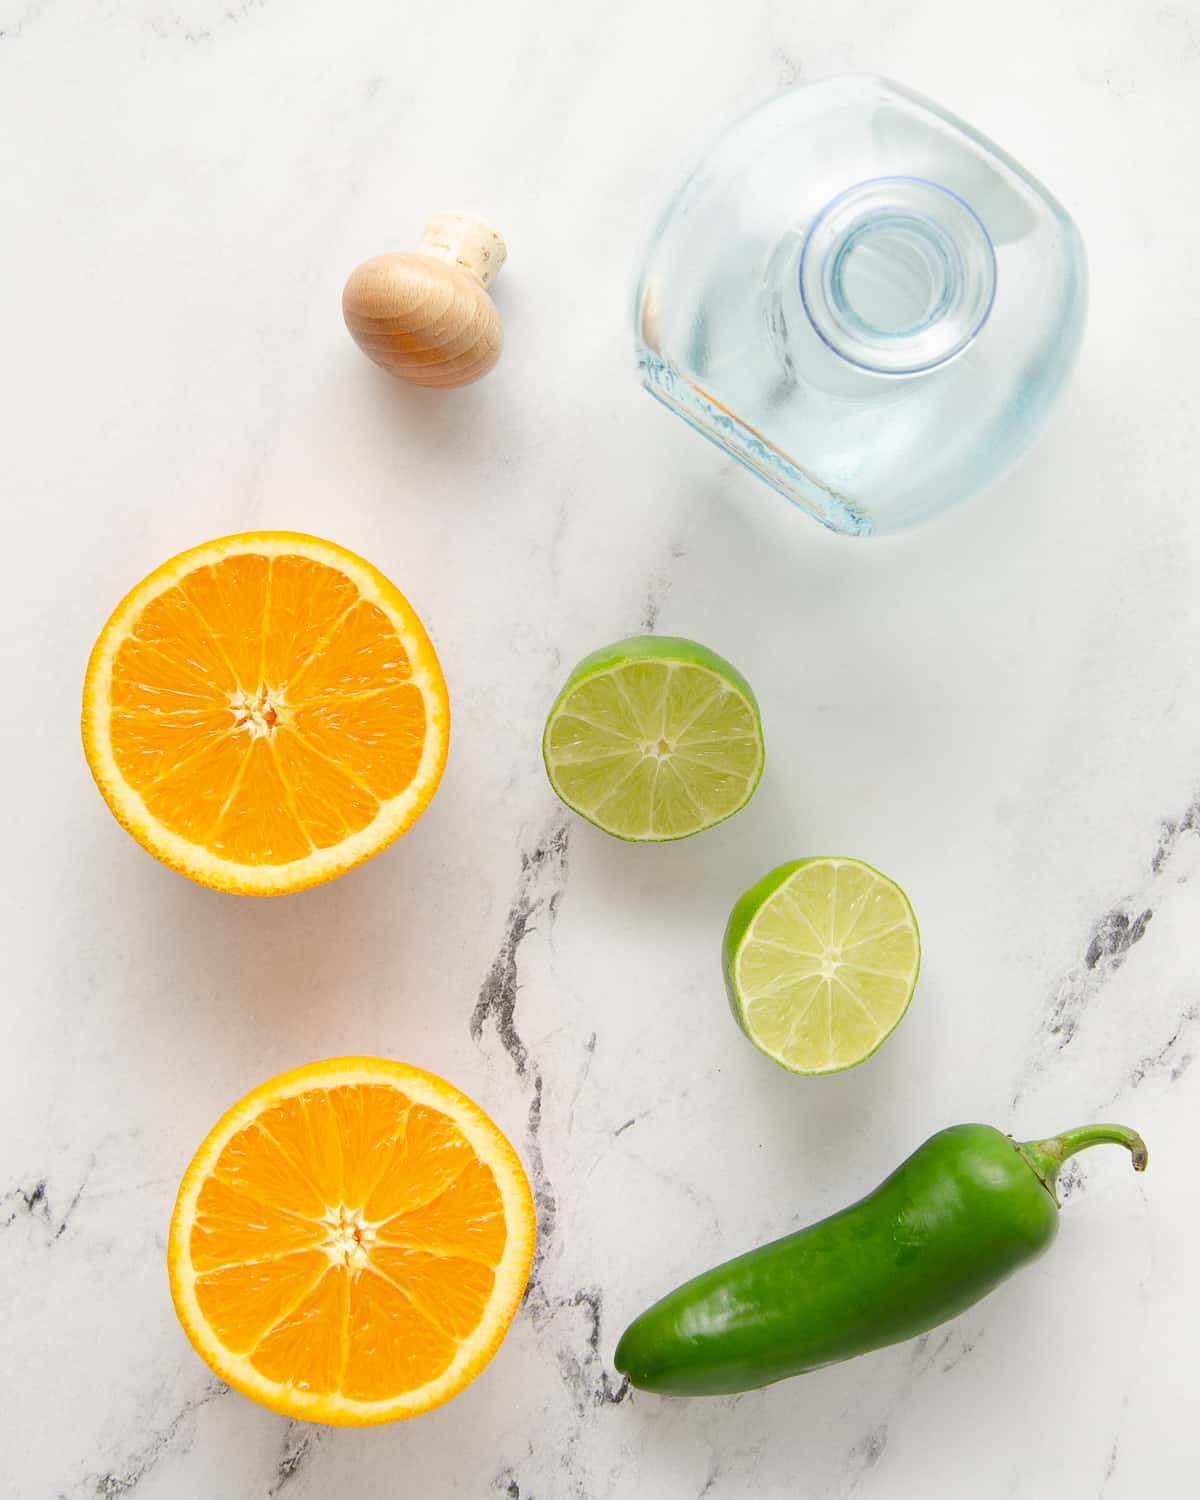 Ingredients to make a spicy margarita: jalapeno, orange, lime and tequila.